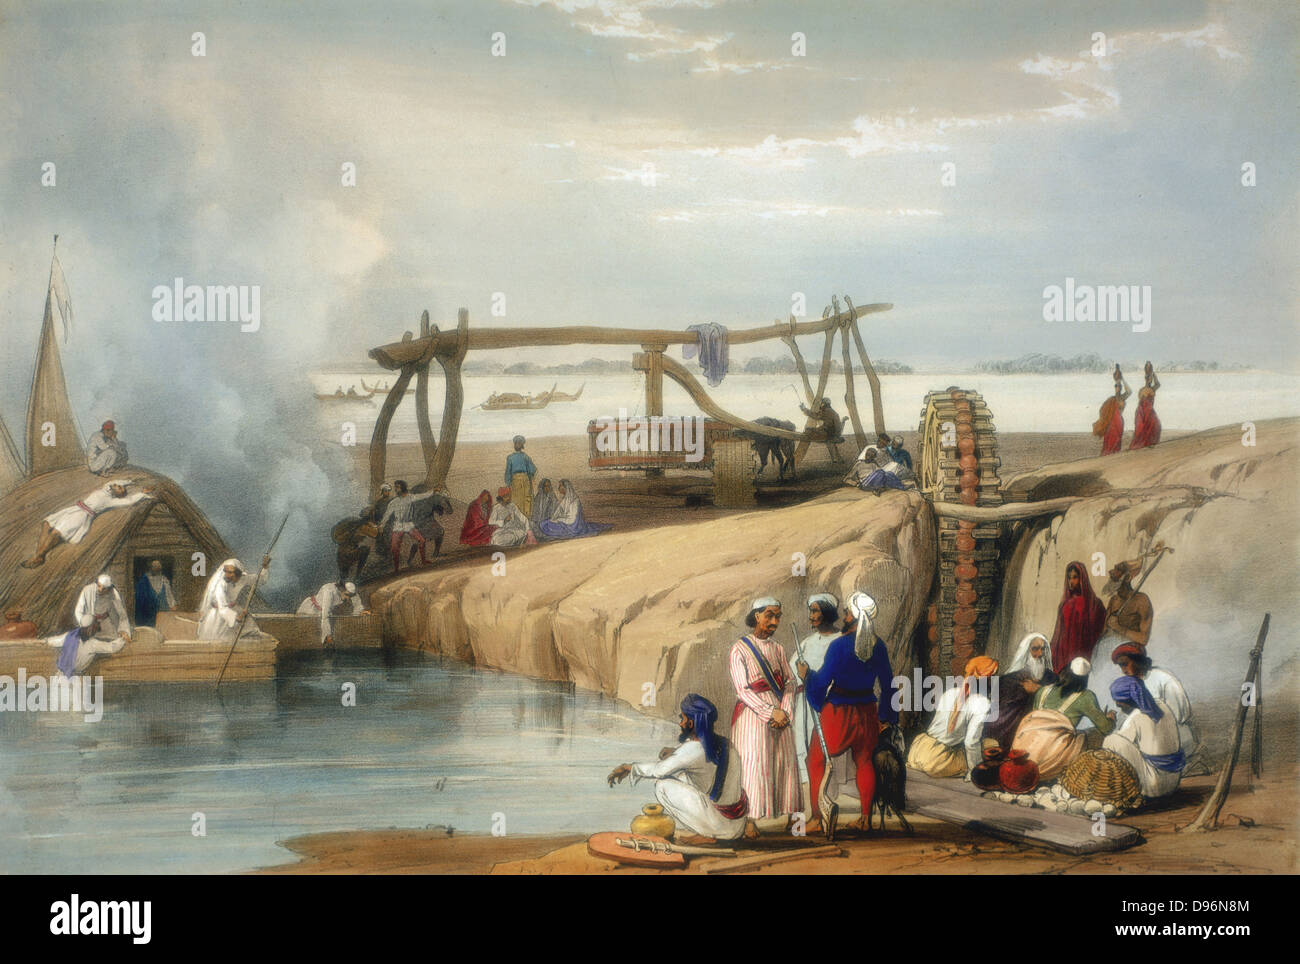 Persian wheel raising water from the Sutlej River - Punjab, Pakistan. (India). Hand coloured lithograph from Atkinson 'Afghanistan', London, 1842 Stock Photo